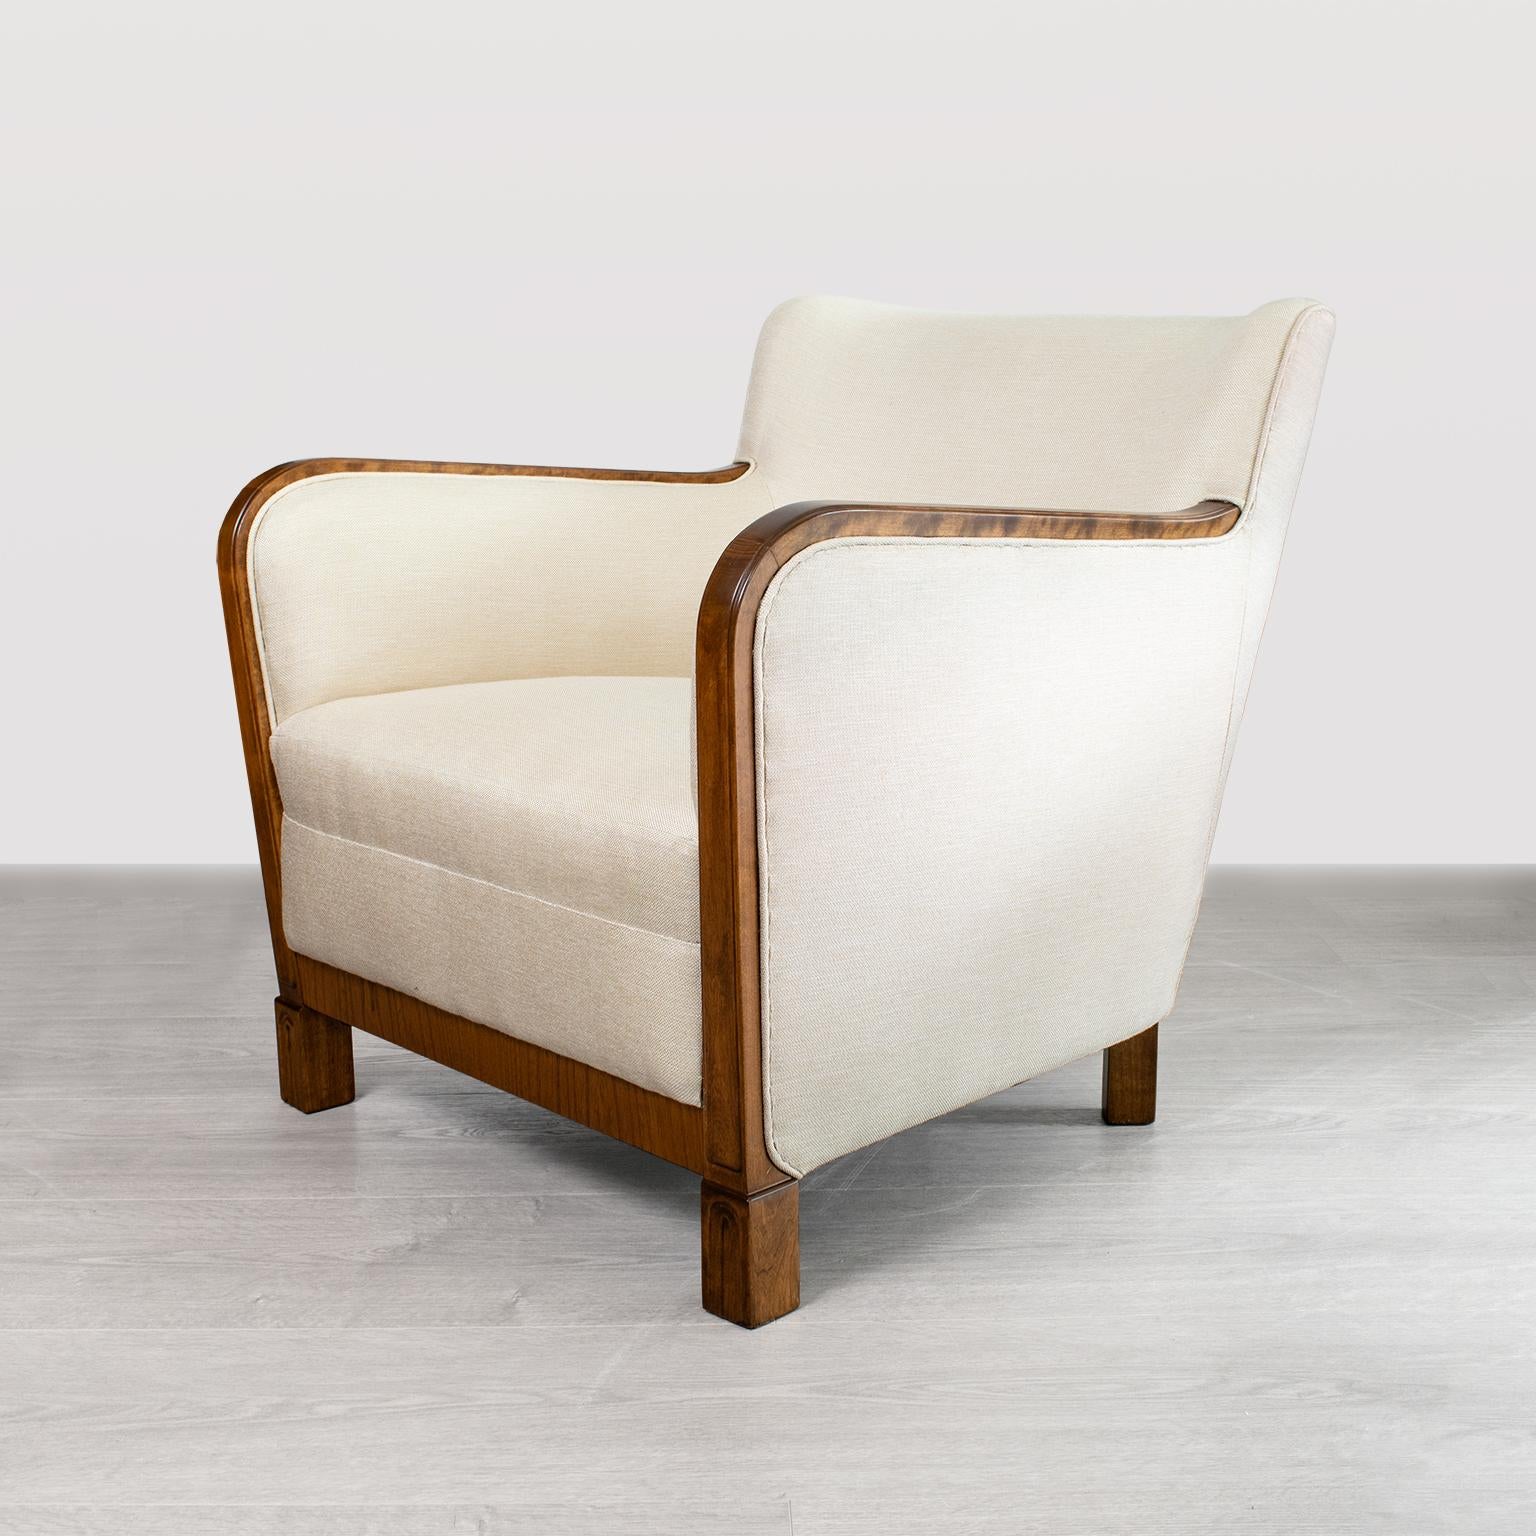 Pair of sleek Scandinavian Modern late 1930s lounge chairs with polished and carved sycamore frames. Newly restored, newly upholstered in textured cream colored fabric.
  